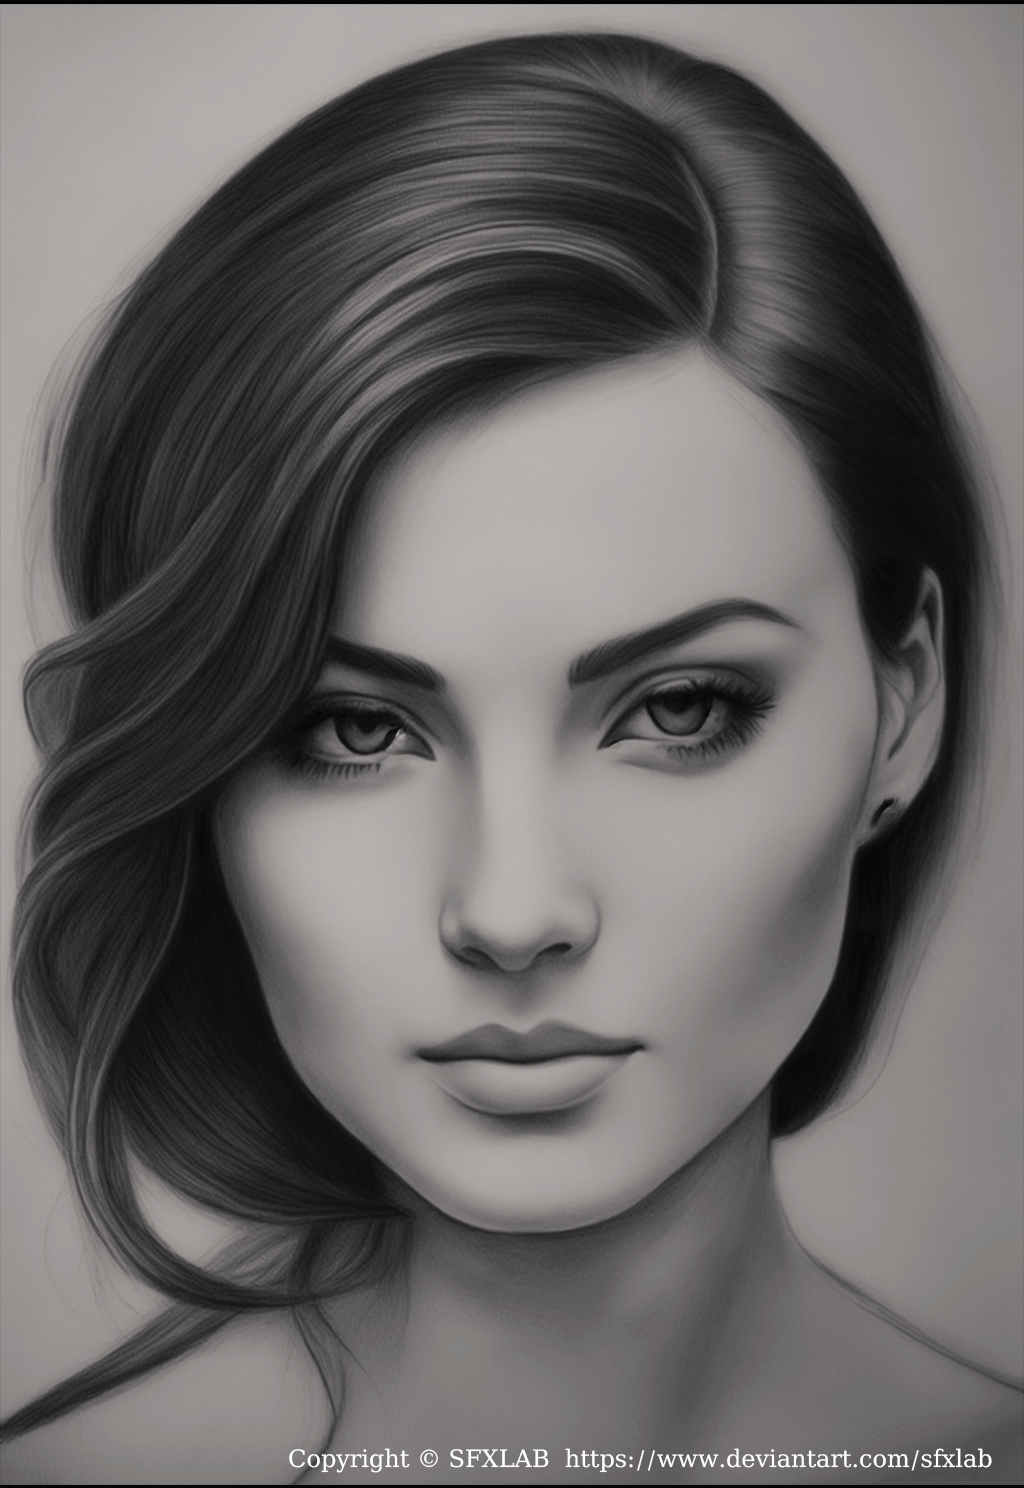 AI - Realistic Drawing Woman Portrait - 12 by SFXLAB on DeviantArt